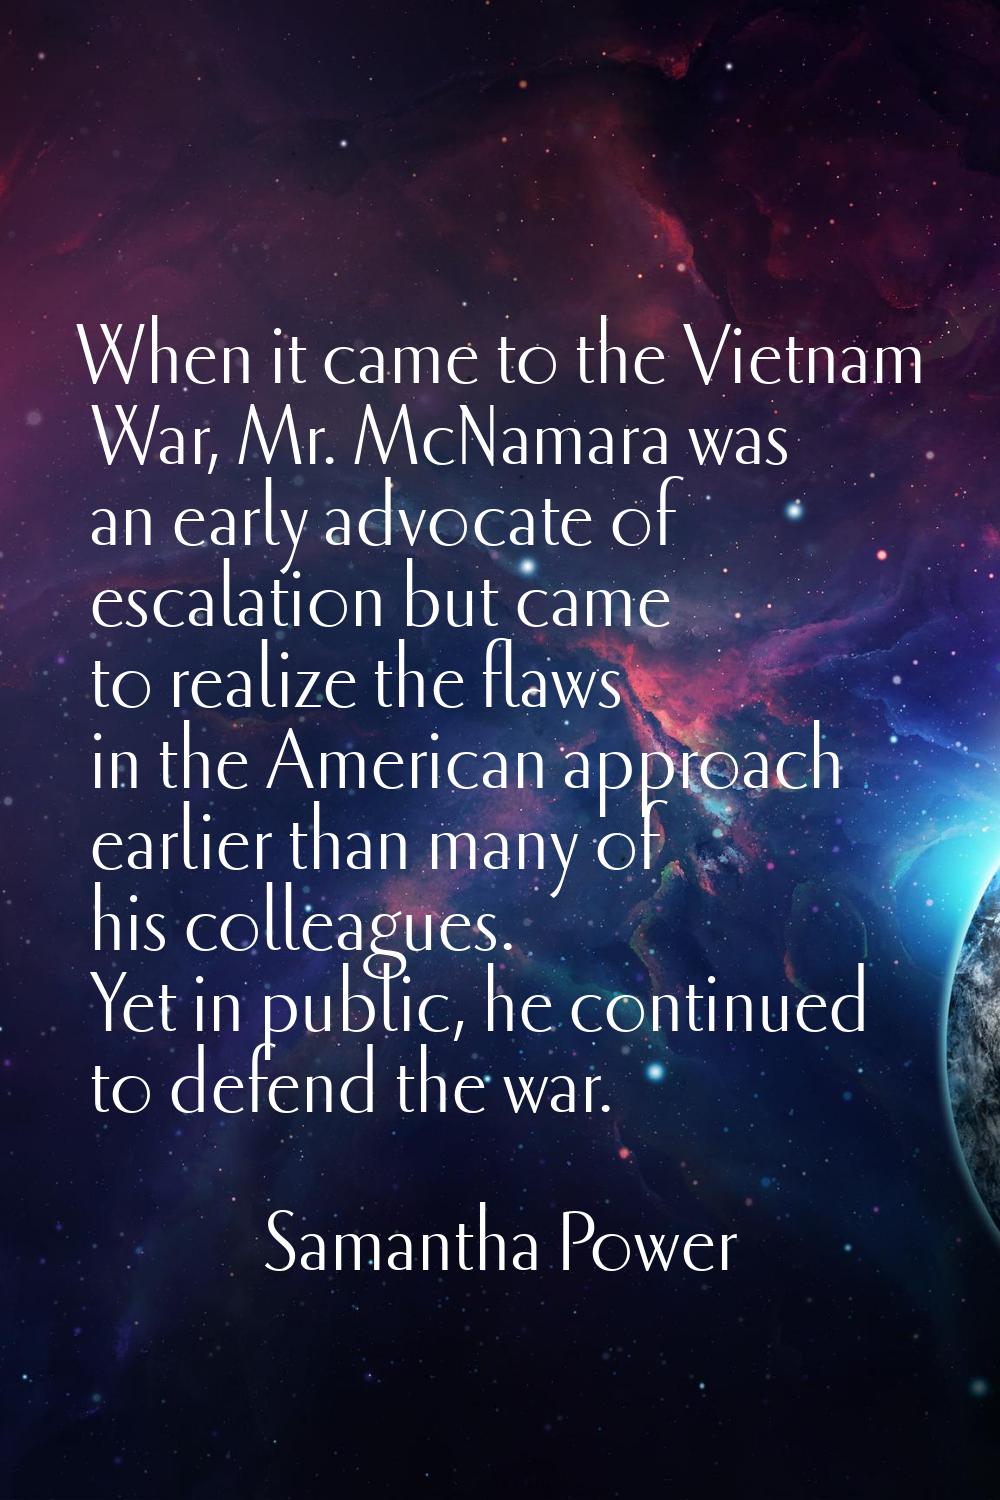 When it came to the Vietnam War, Mr. McNamara was an early advocate of escalation but came to reali